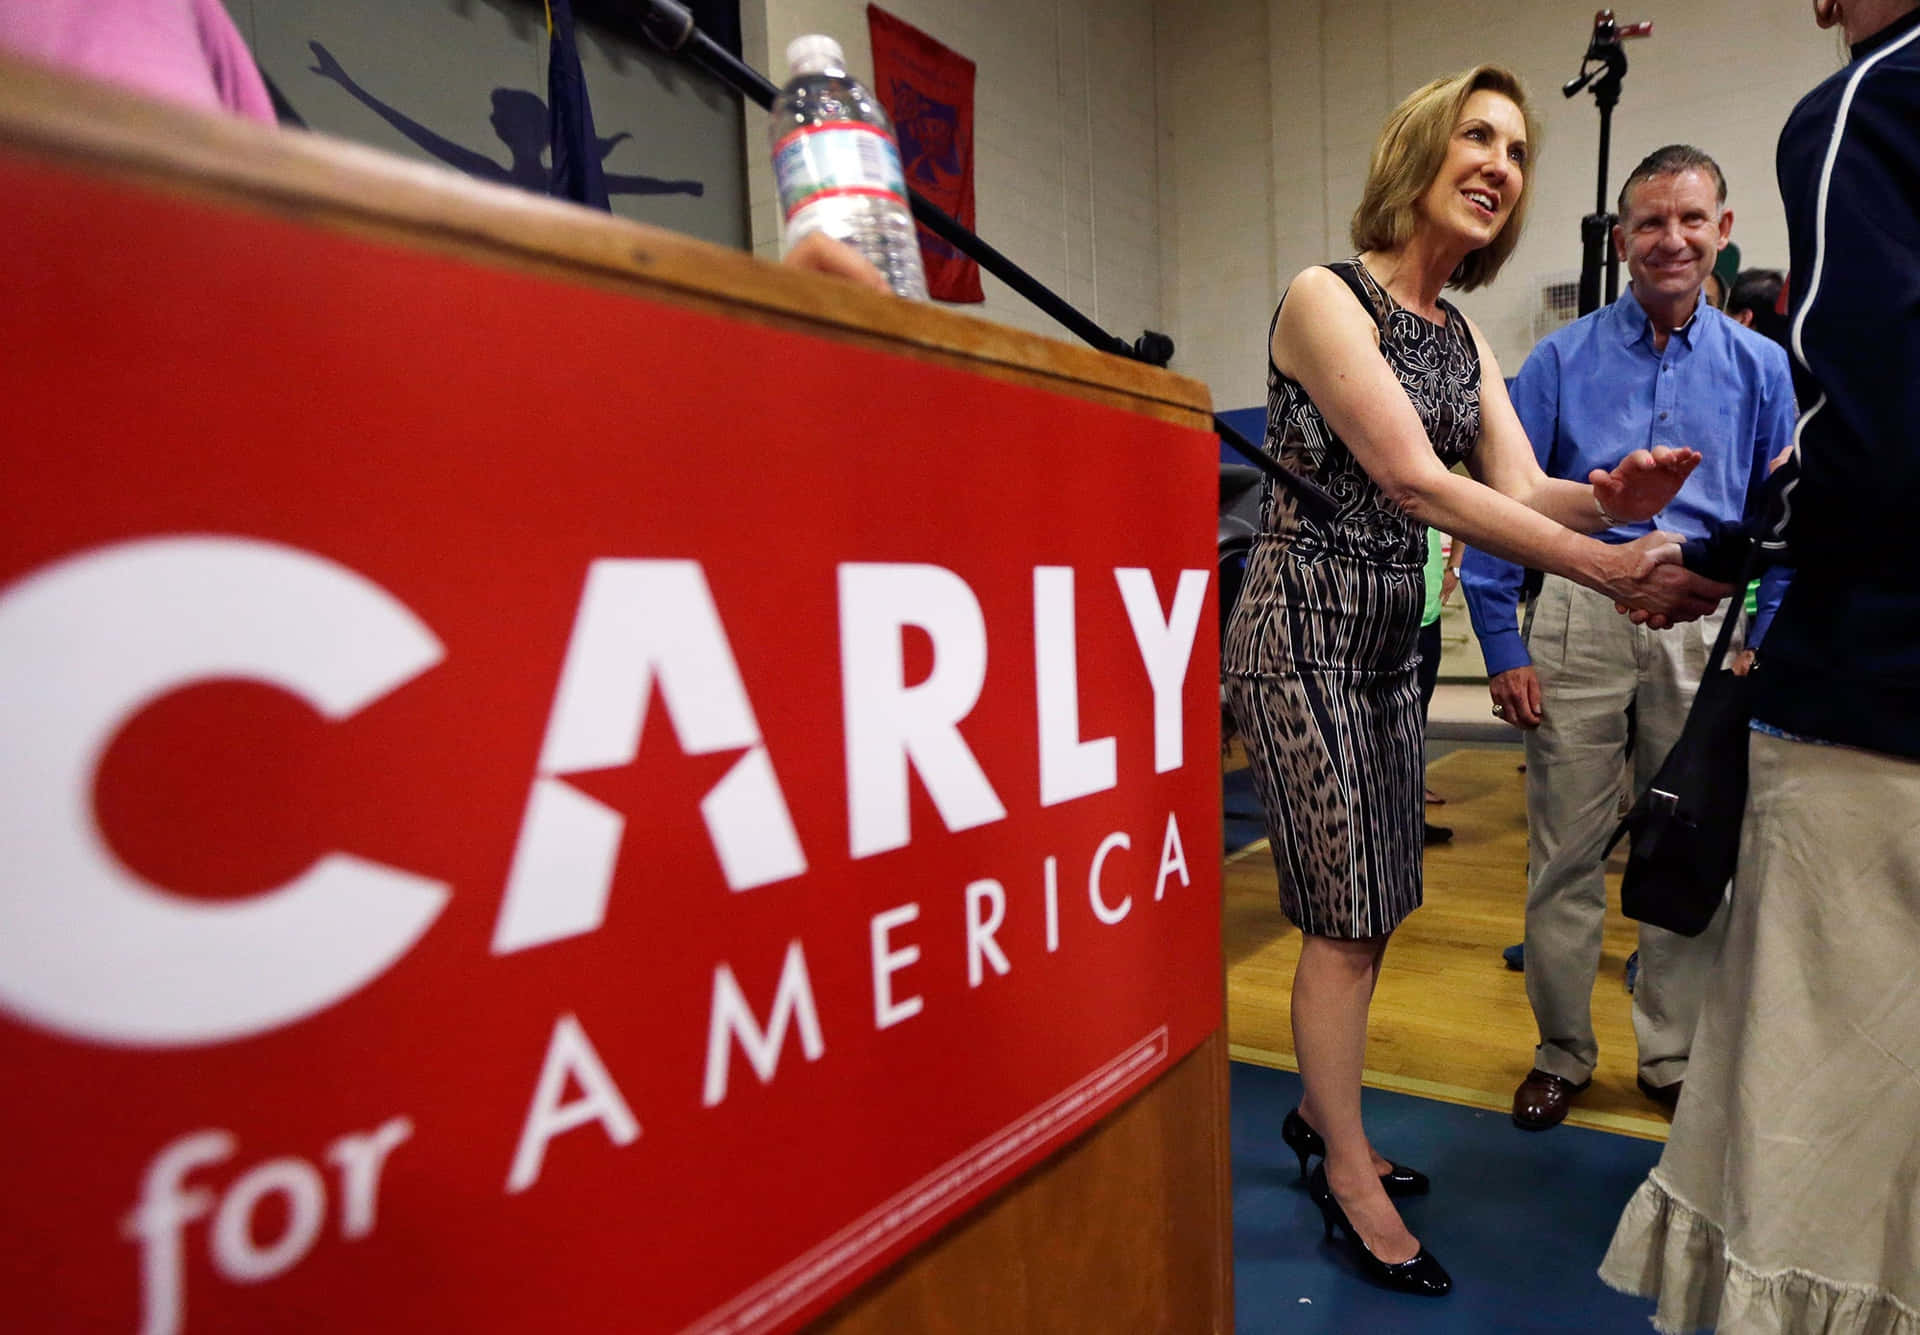 Carly Fiorina Engaging with Supporters Wallpaper